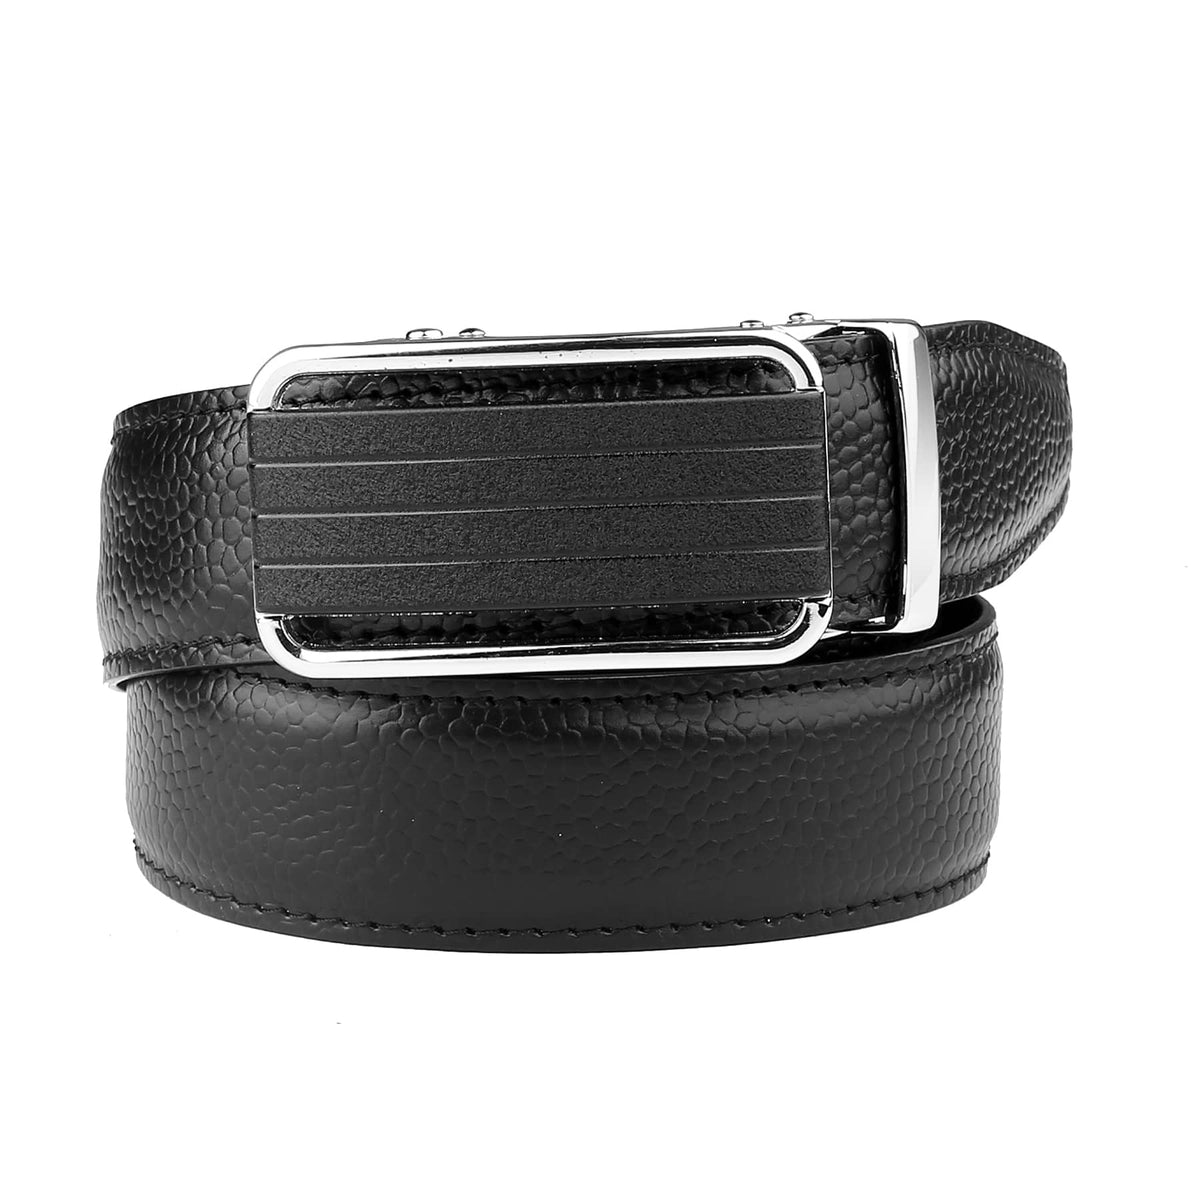 Bacca Bucci Premium Genuine Leather Formal Dress Belts with an Auto Lock Buckle